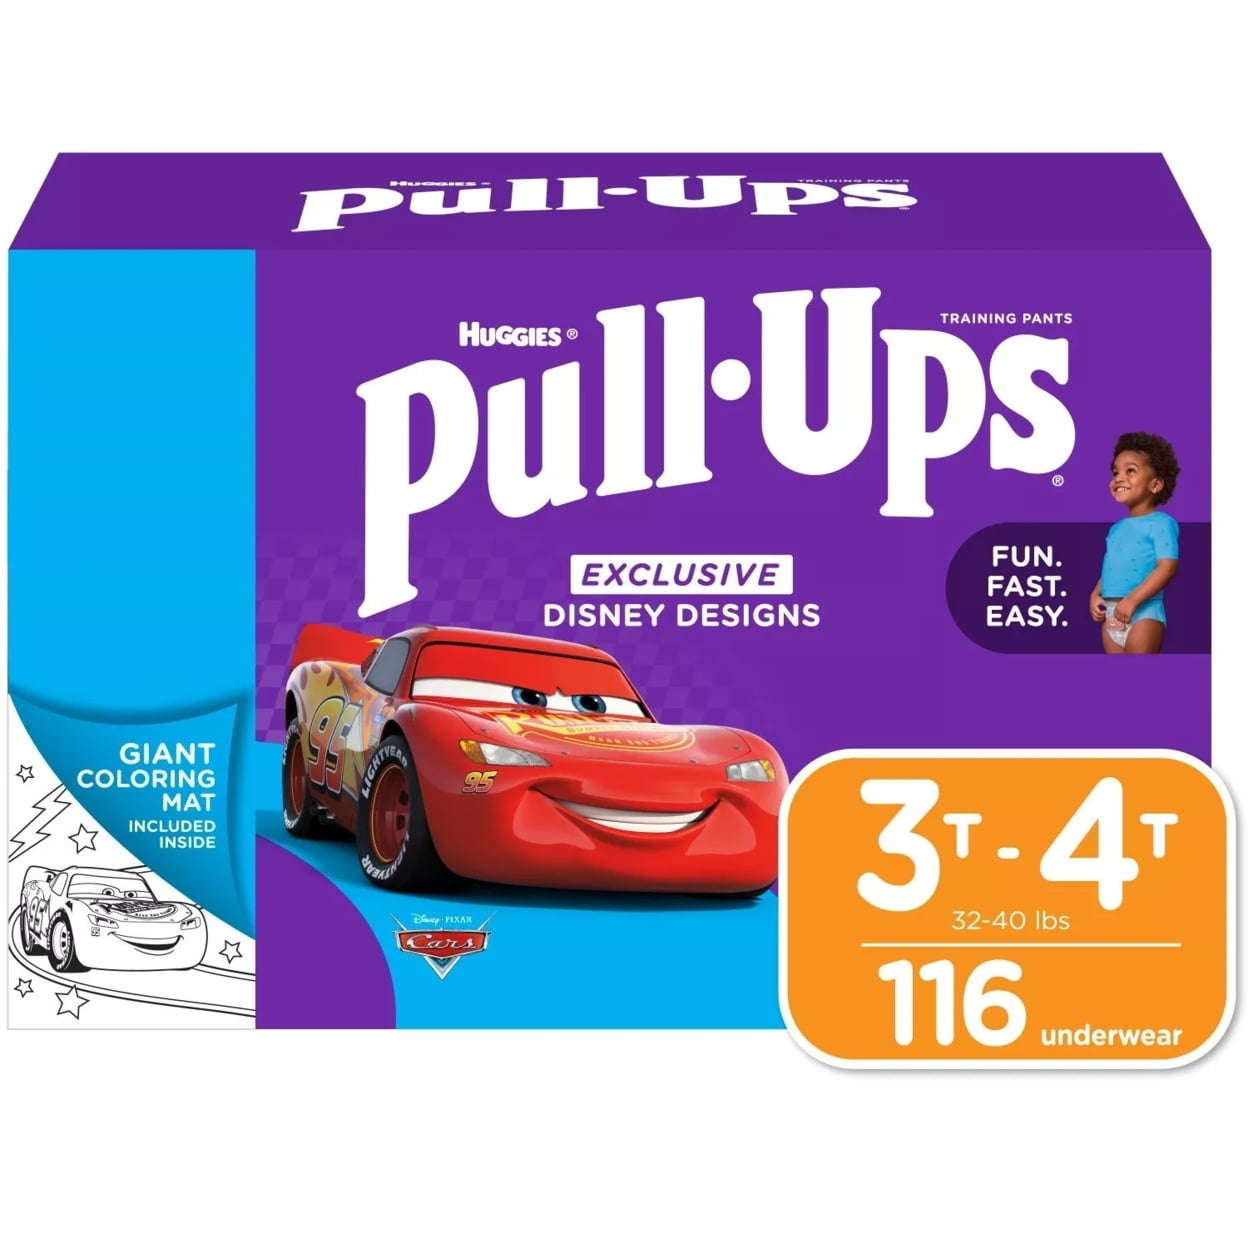 Huggies Pull-Ups Training Pants for Boys 3T-4T 32-40 Pounds (116